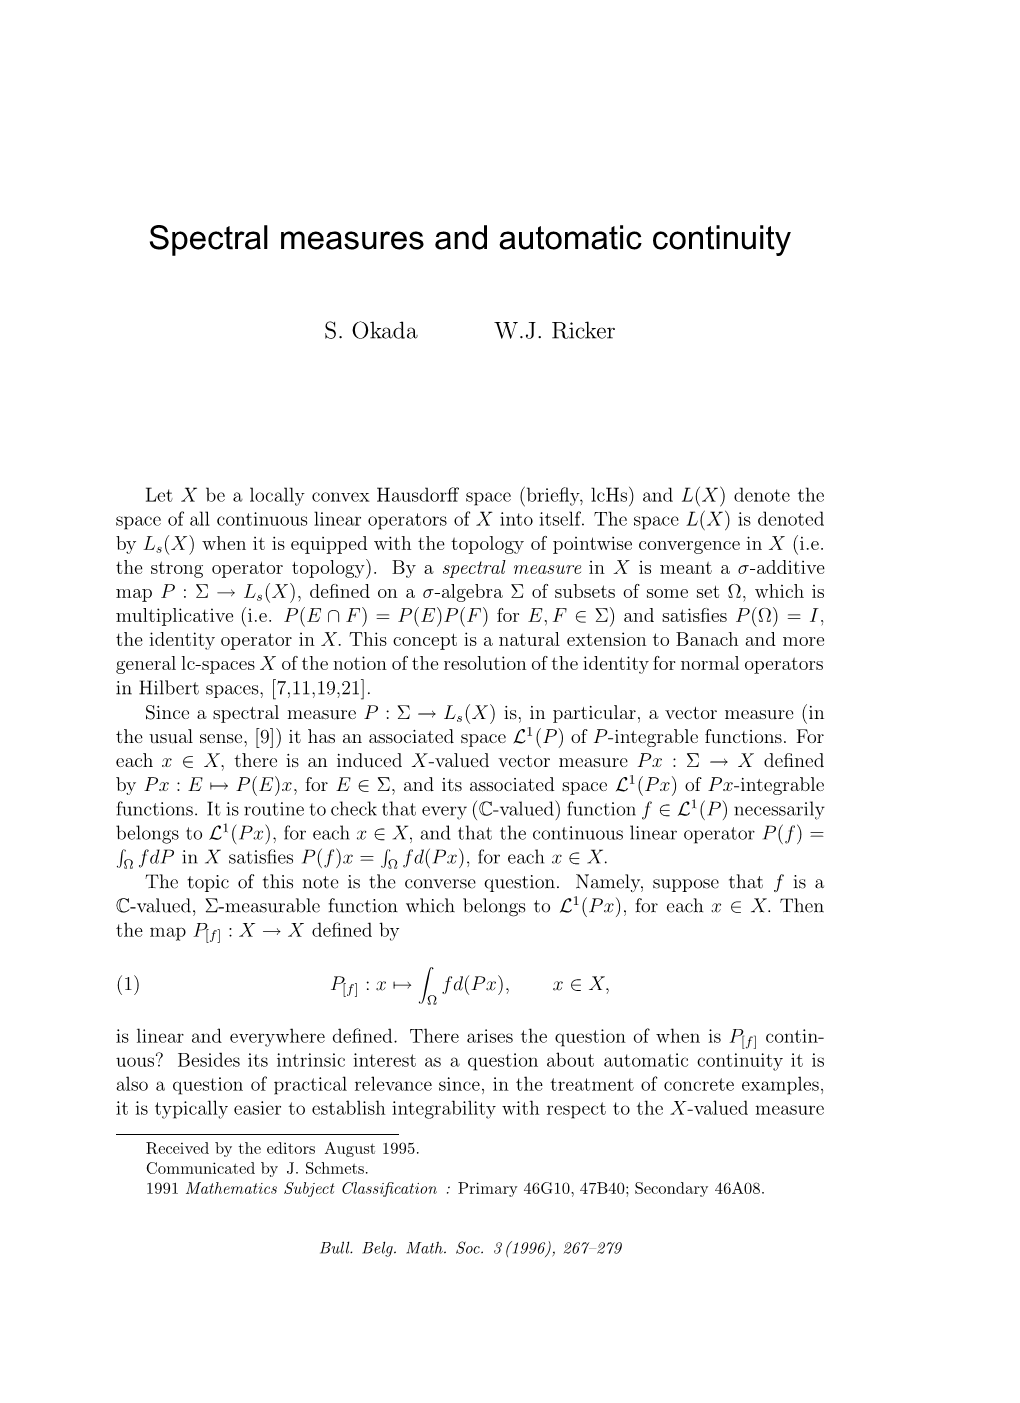 Spectral Measures and Automatic Continuity